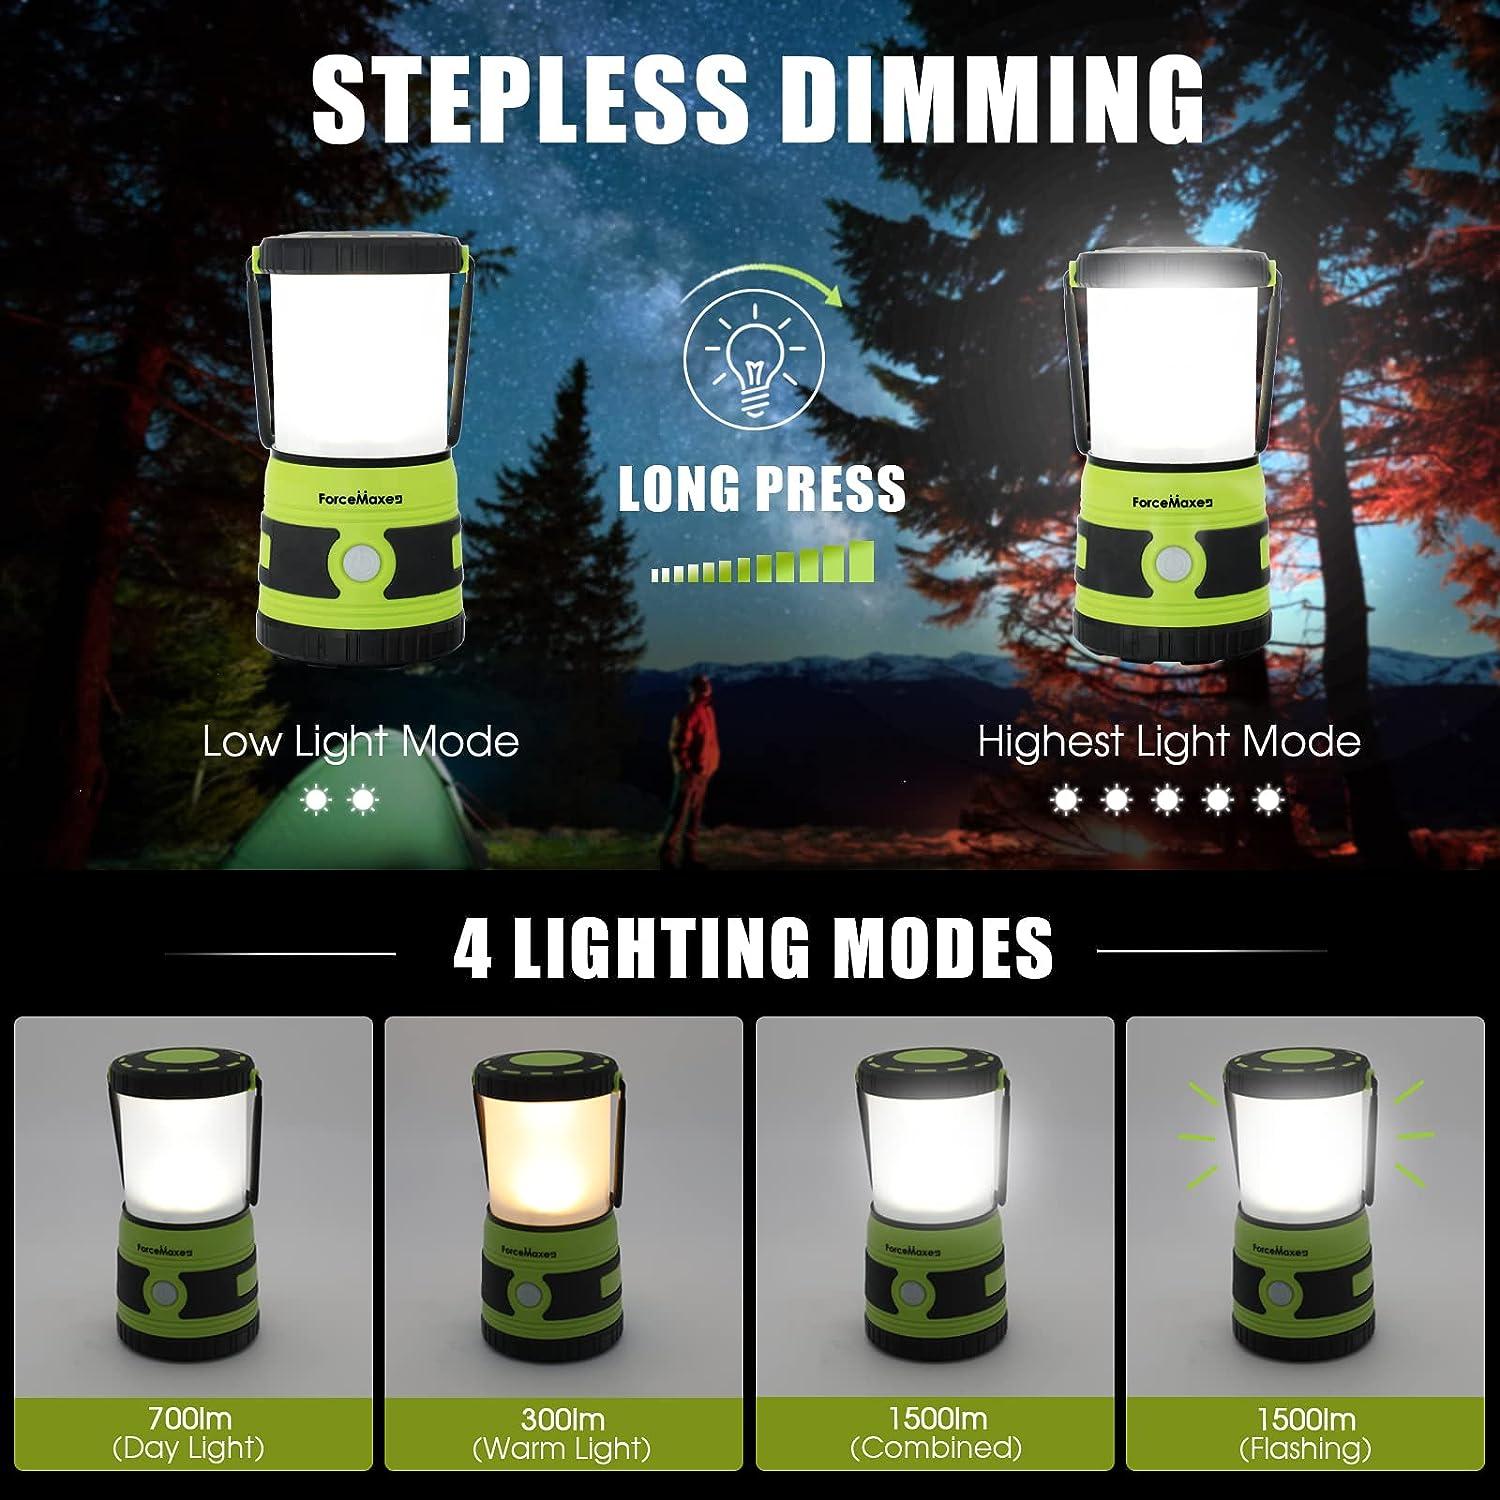 Dumble LED Camping Lantern Lights - 4pk Collapsible Bright White Battery  Powered Lanterns for Power Outages, Emergency Supplies, and Outdoor Hiking